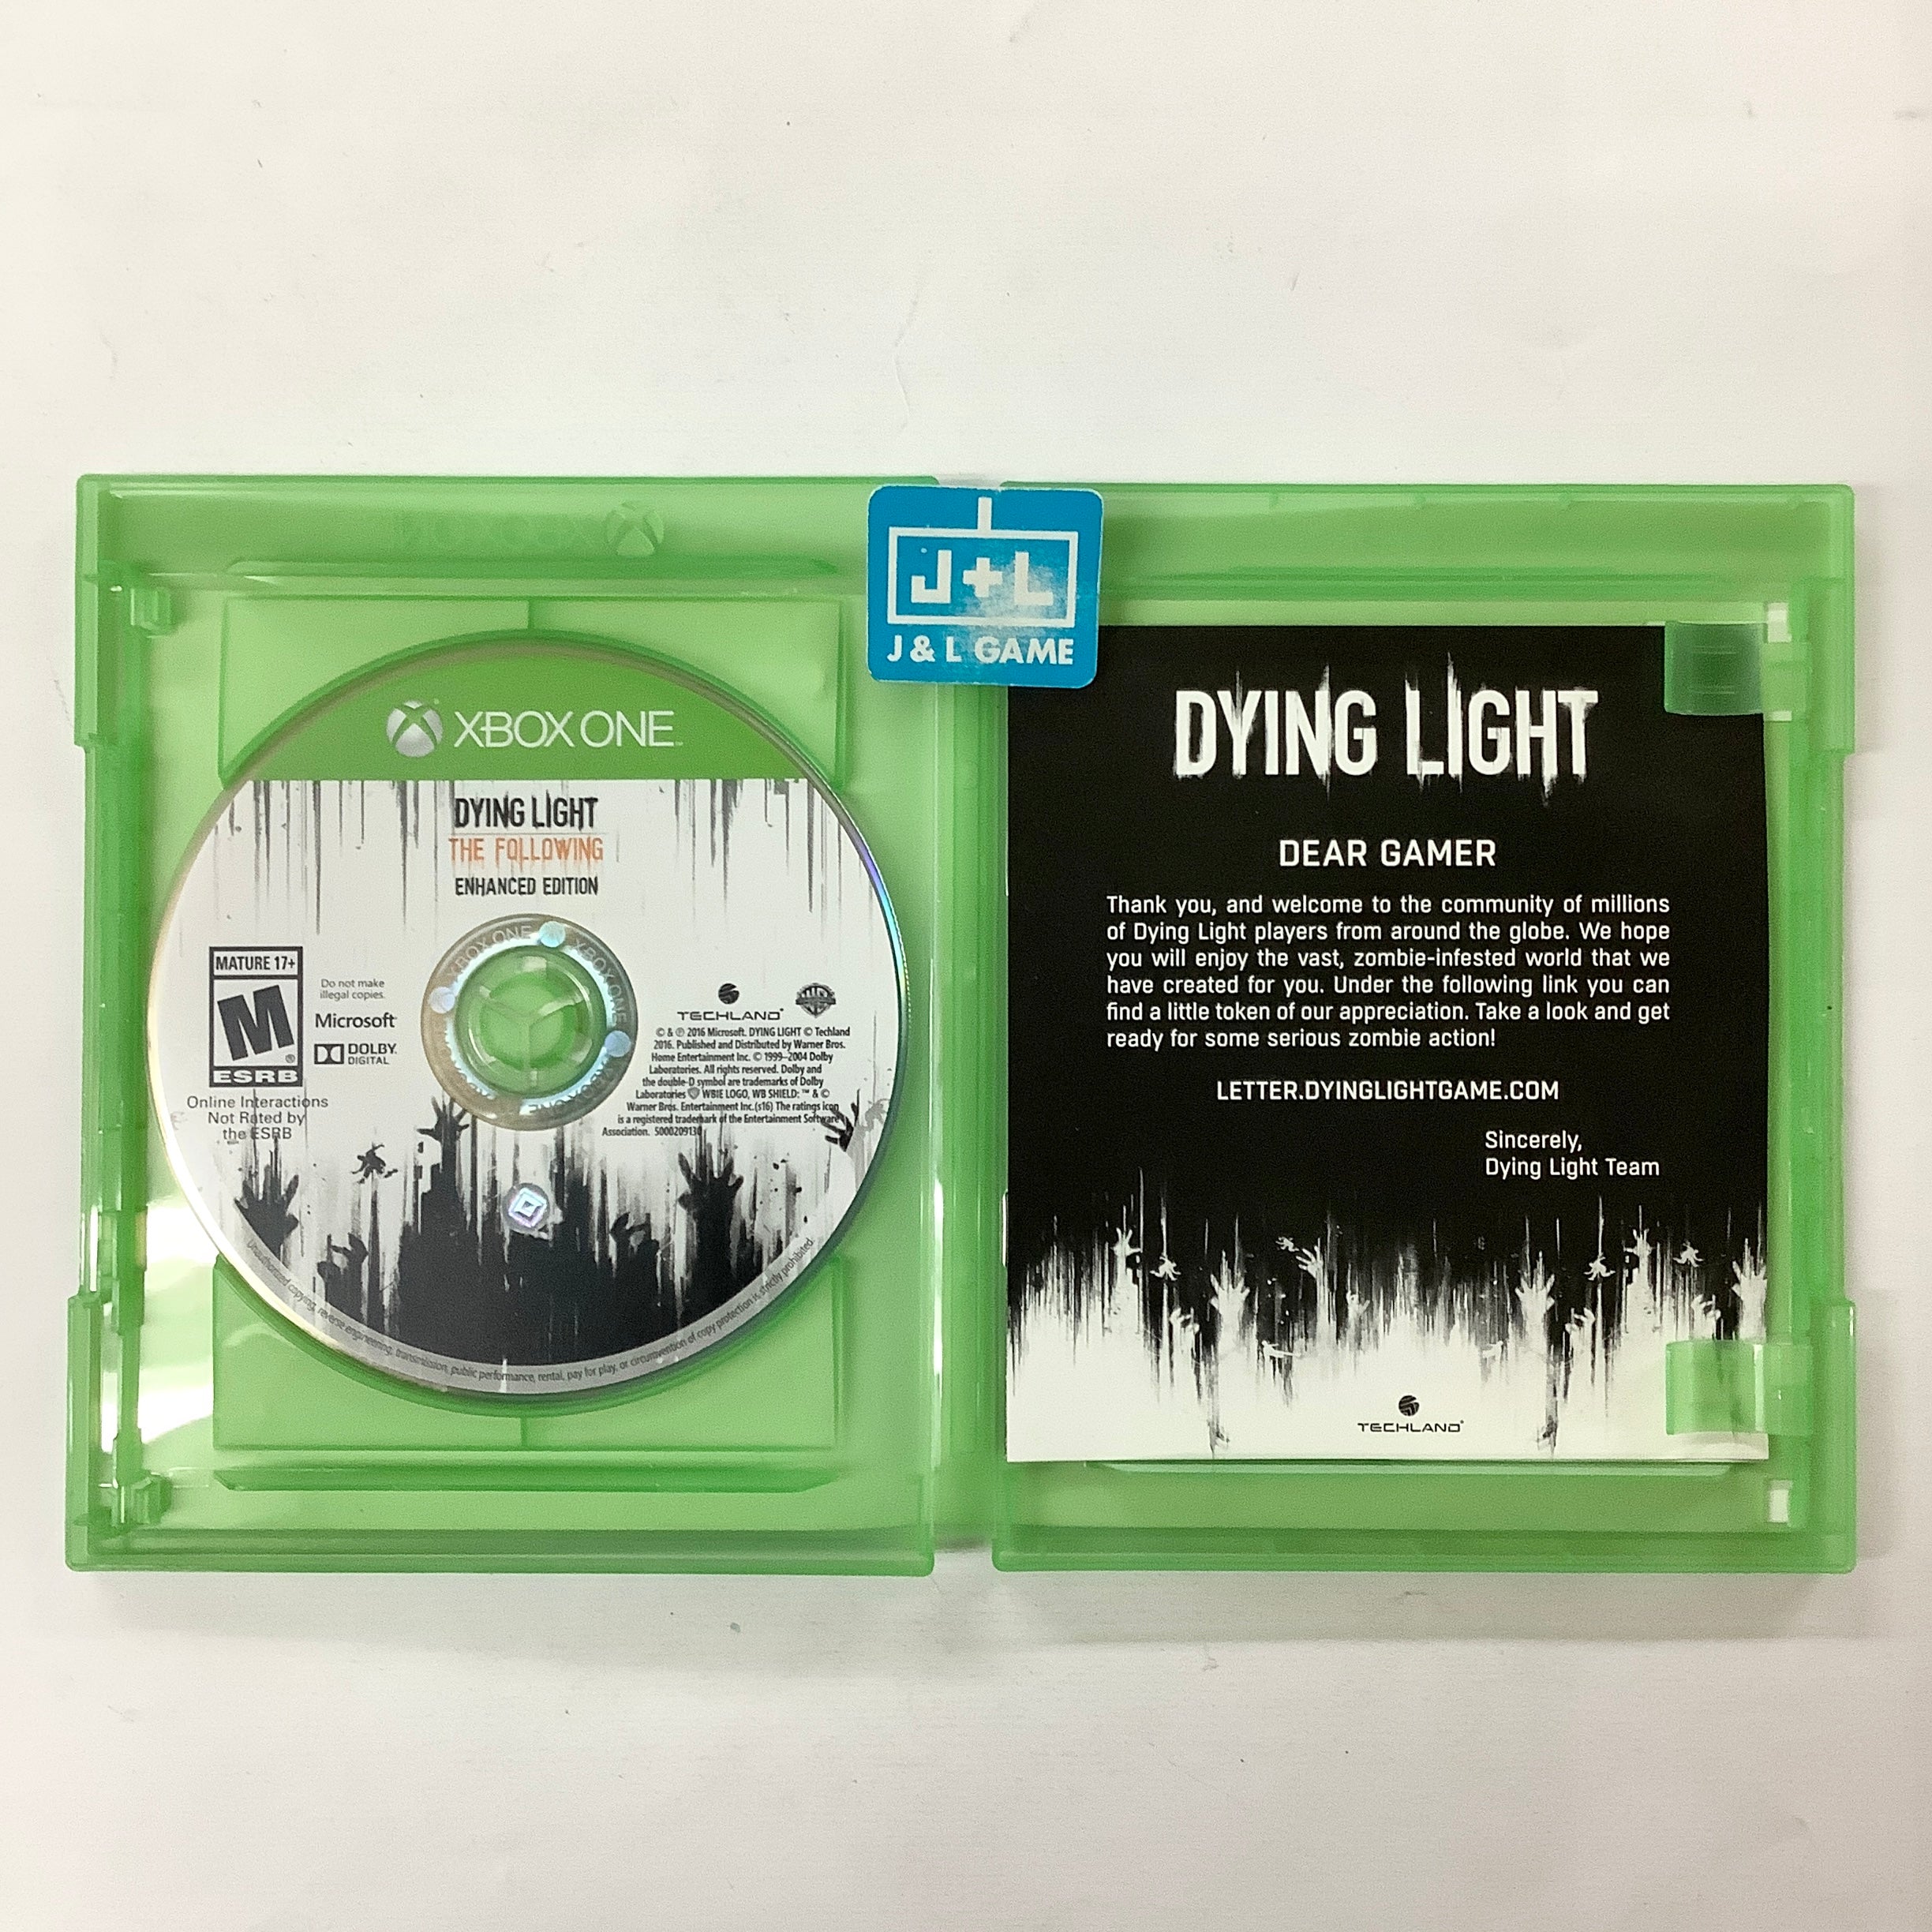 Dying Light: The Following - Enhanced Edition - (XB1) Xbox One [Pre-Owned] Video Games Warner Bros. Interactive Entertainment   